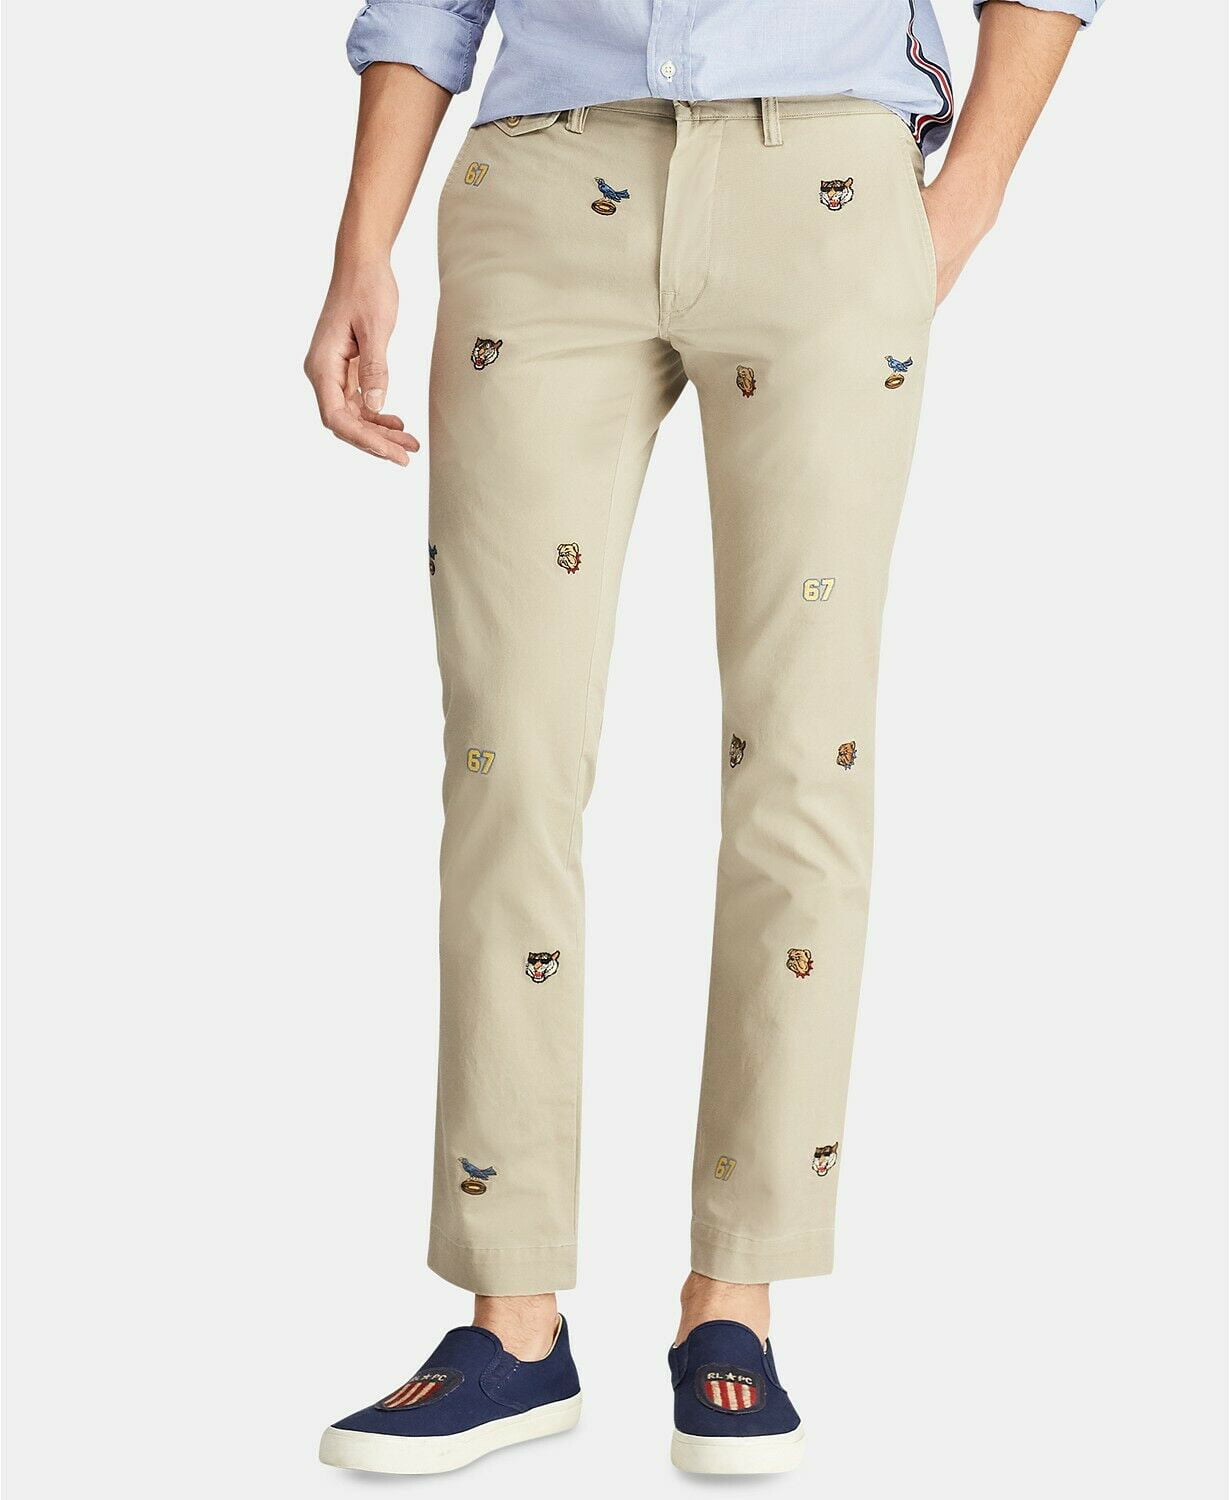 Polo Ralph Lauren Men's Stretch Slim-Fit Embroidered Chino Pants 